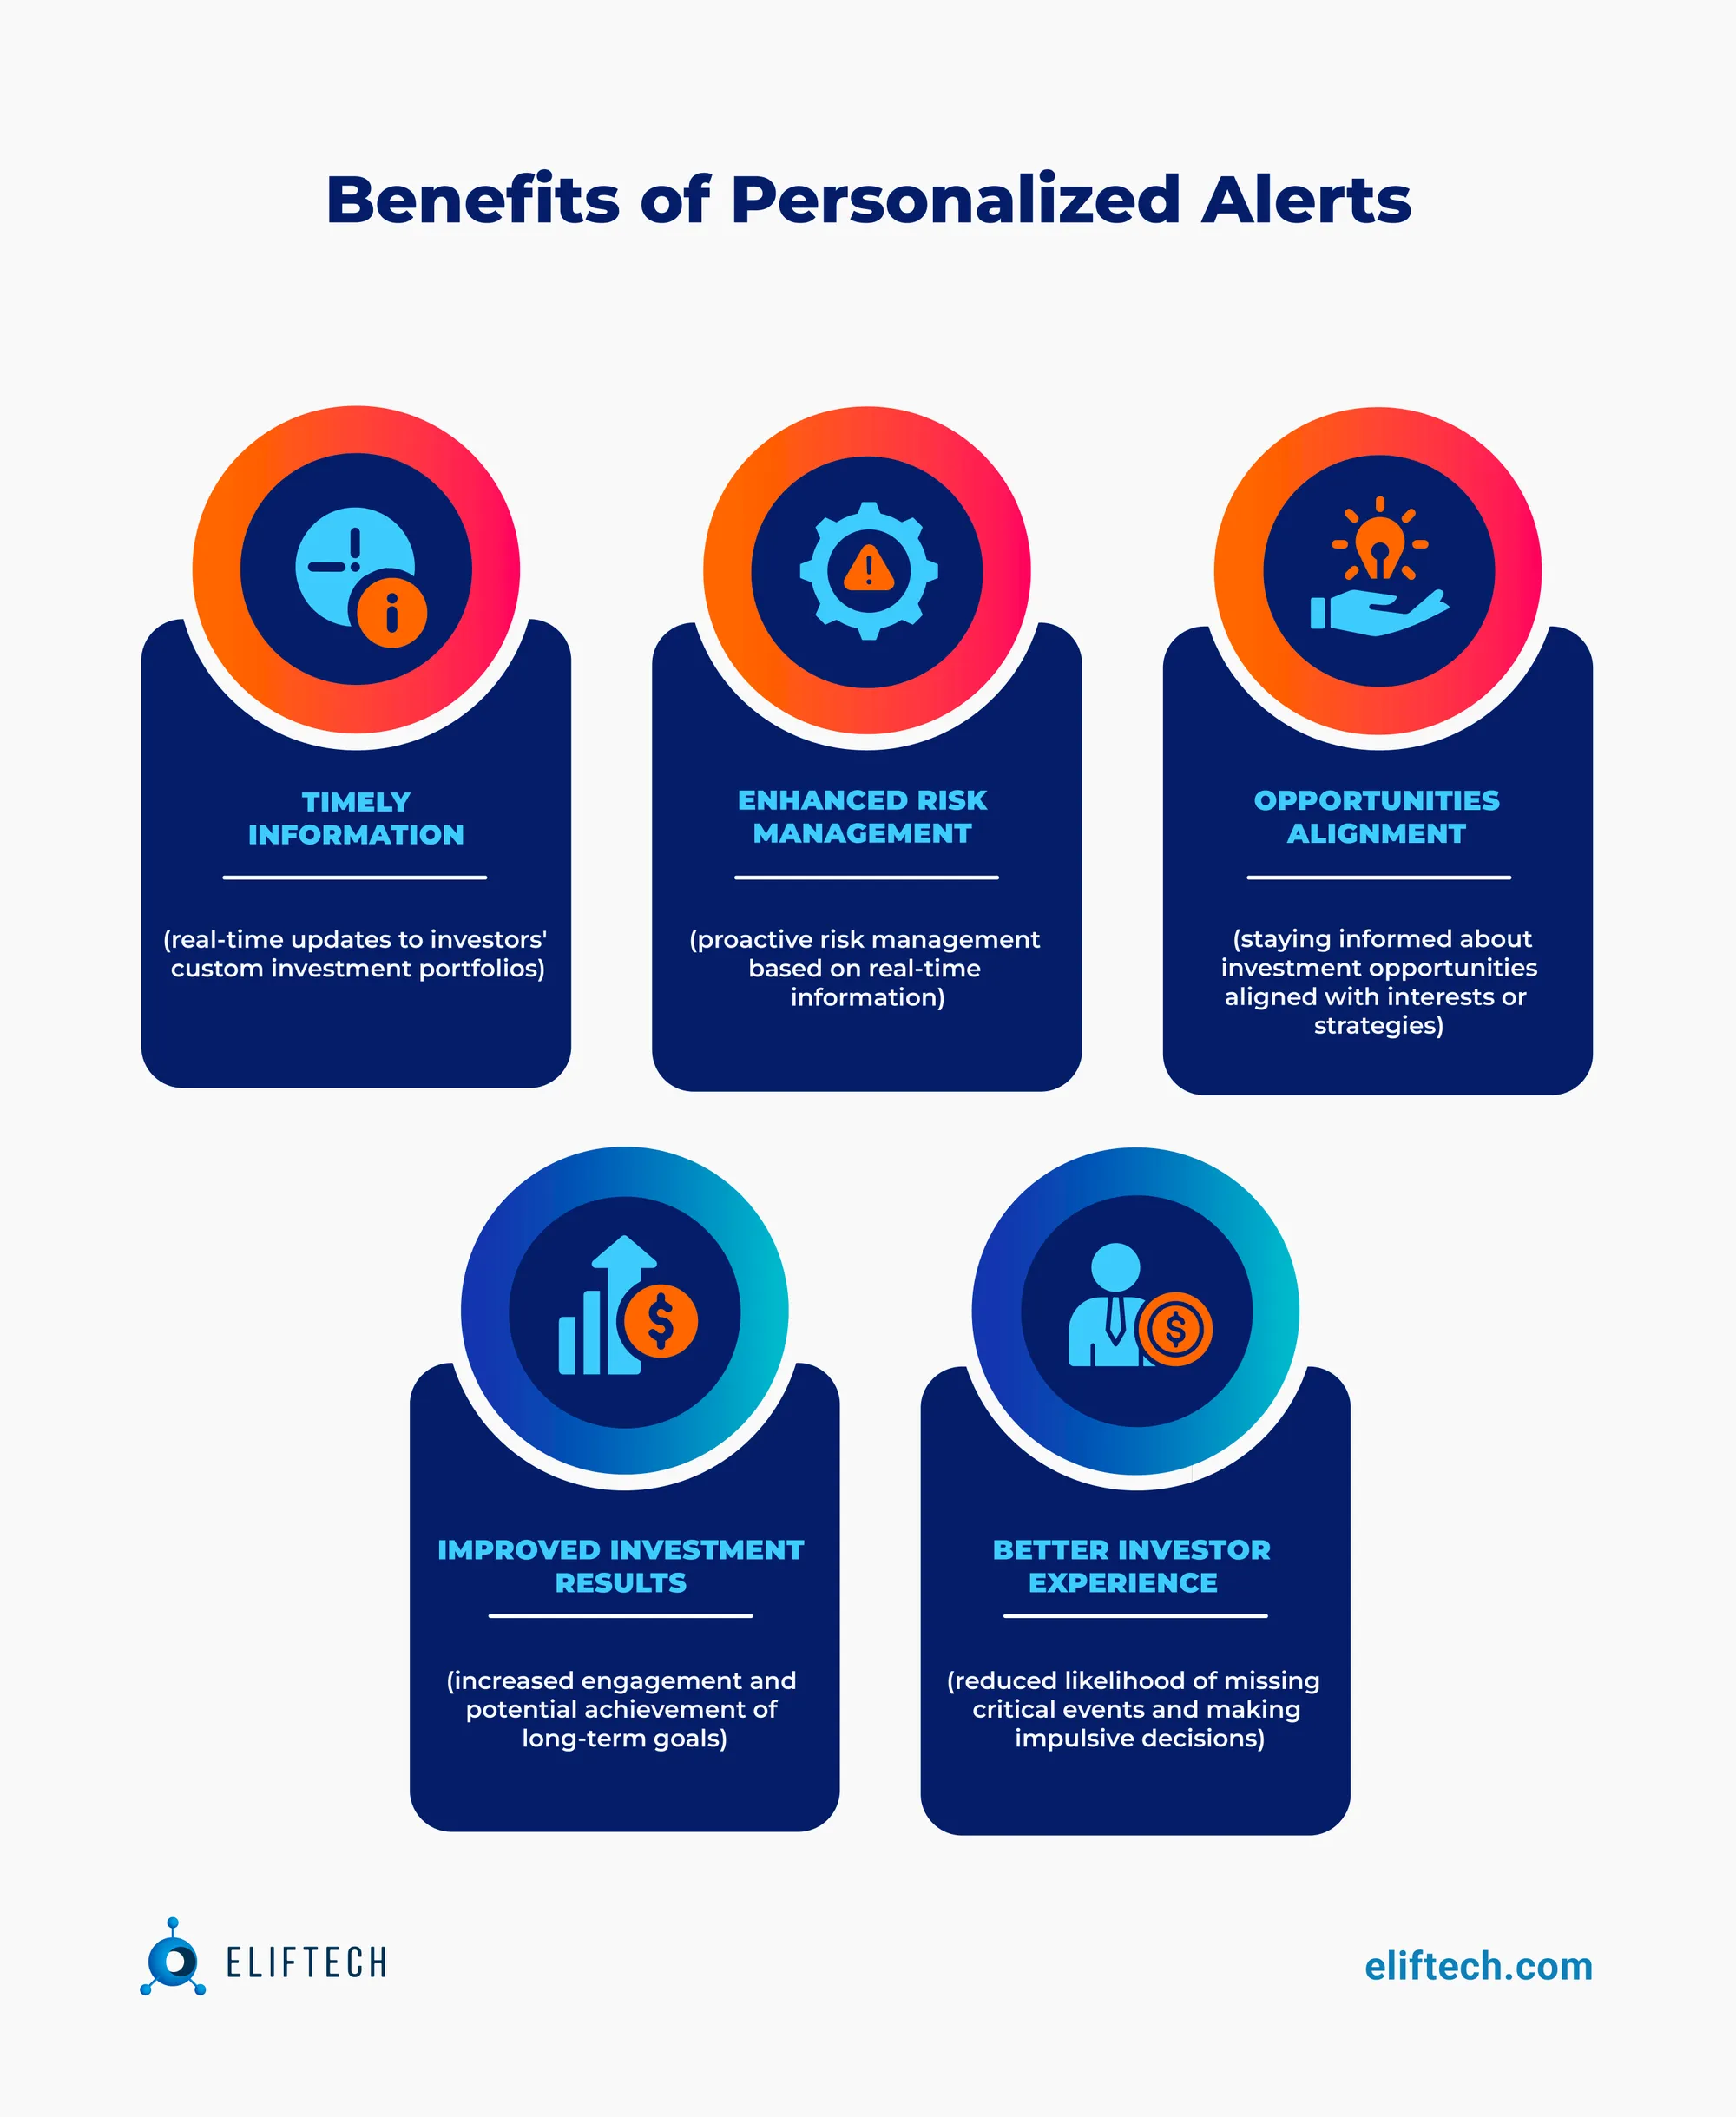 5 Benefits of Personalized Alerts